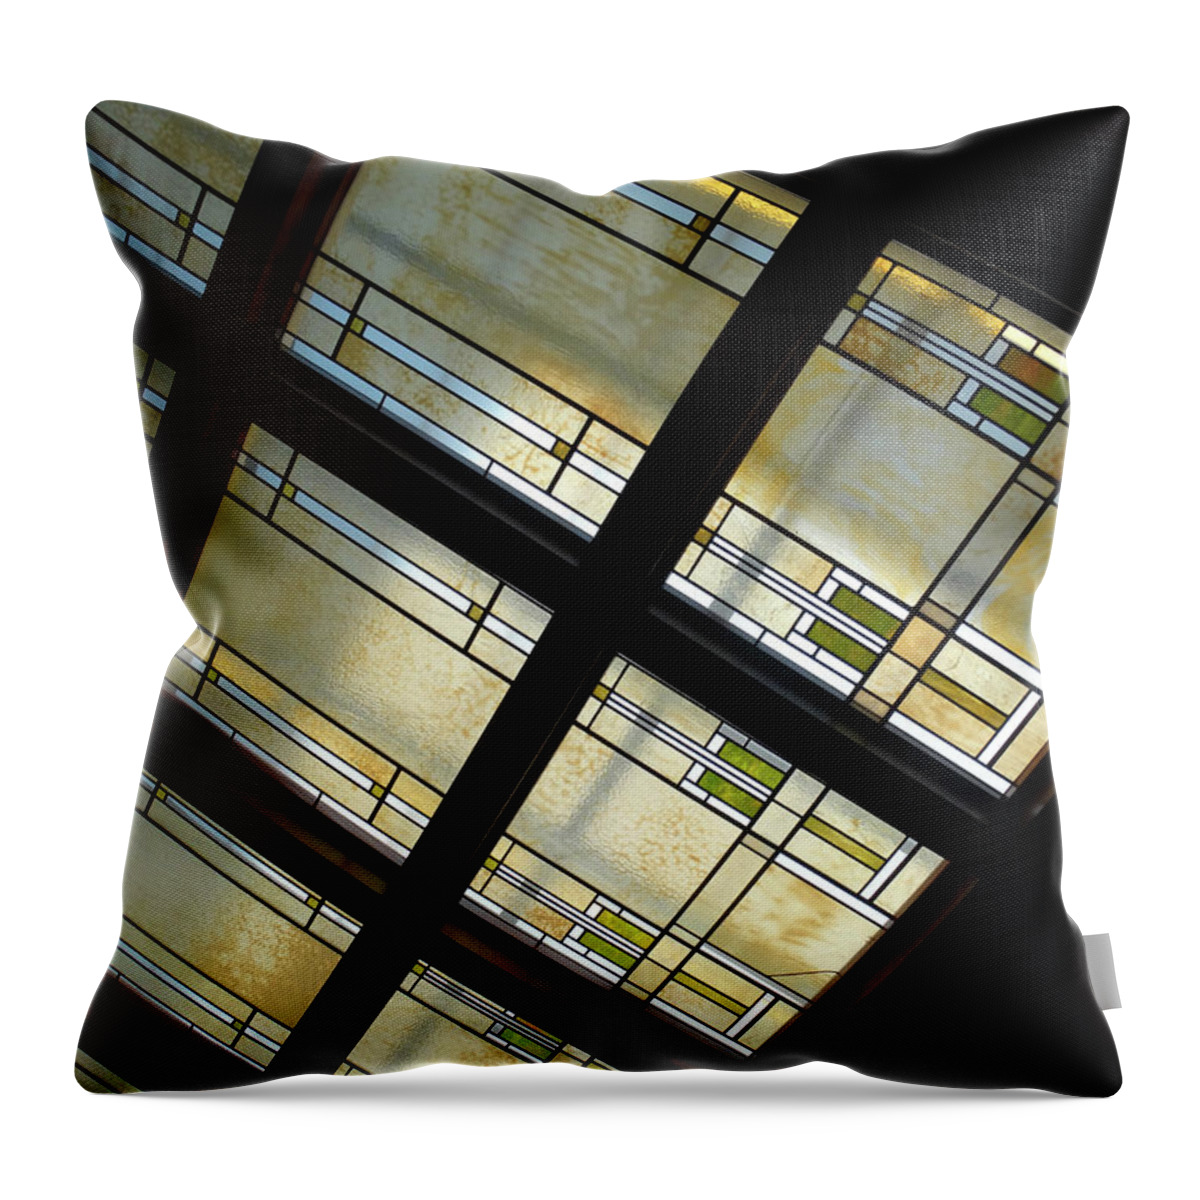 Architecture Throw Pillow featuring the photograph Park Inn Hotel Skylight by David T Wilkinson